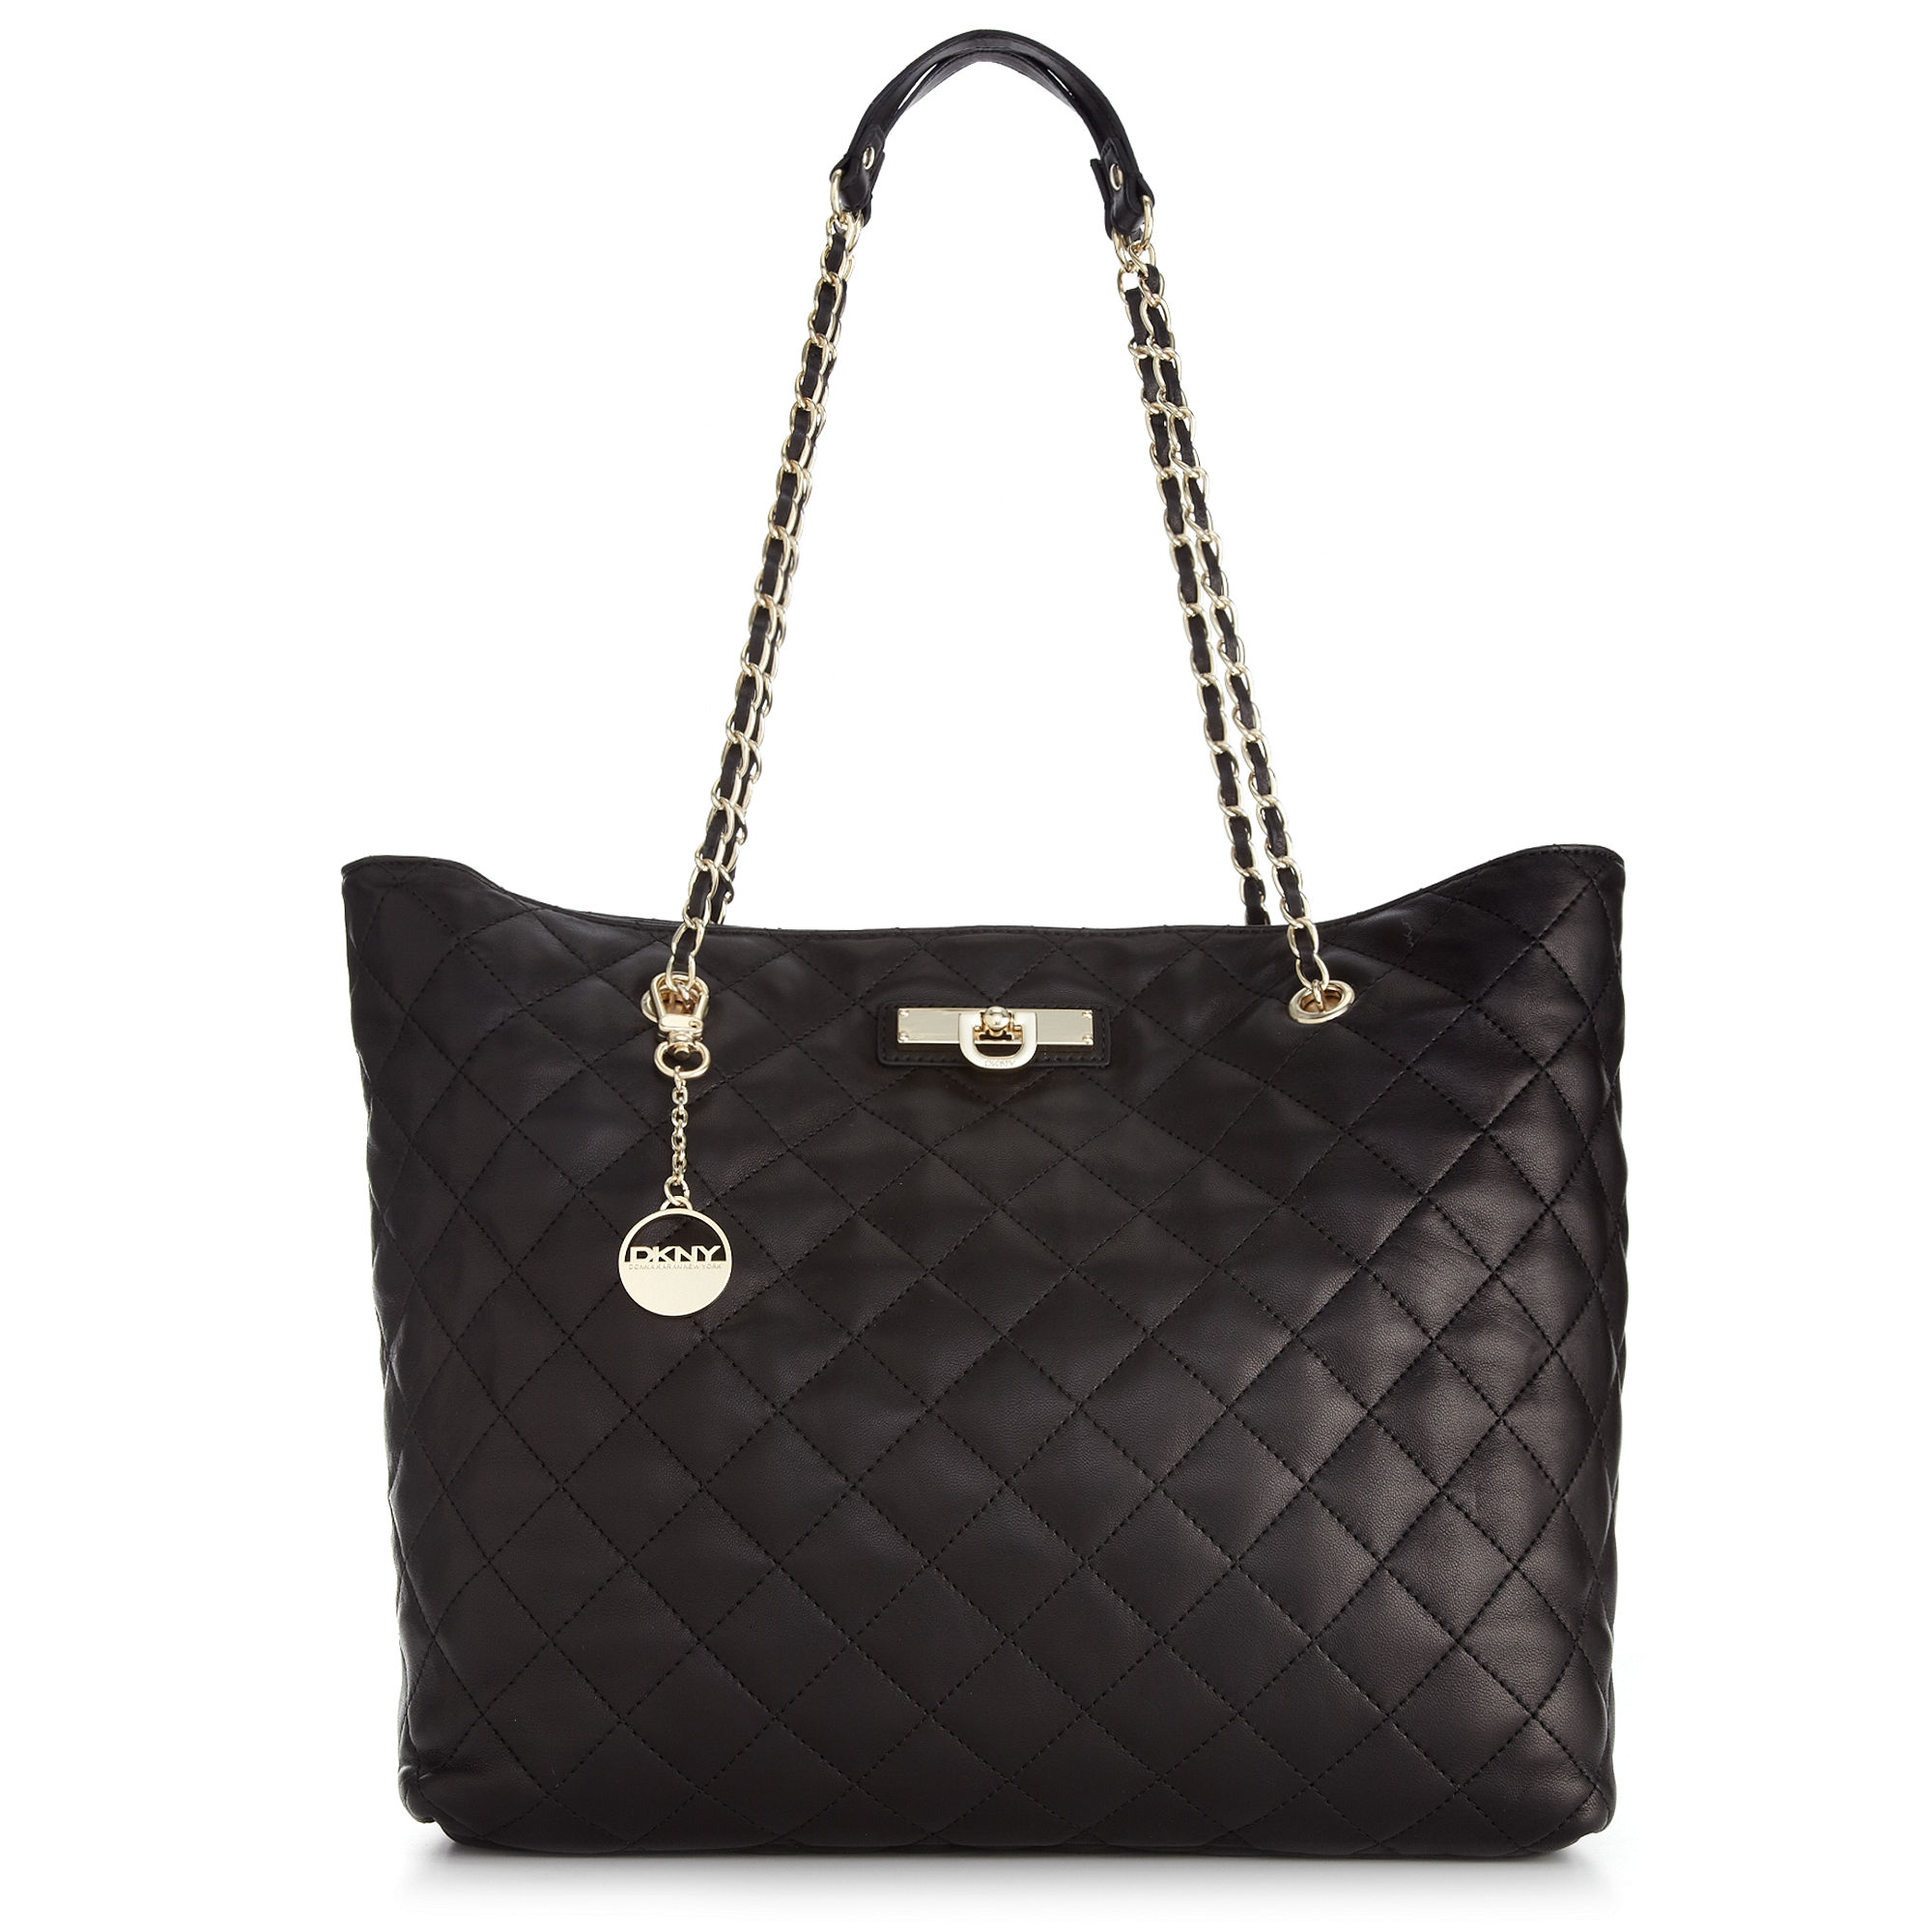 Lyst - Dkny Quilted Nappa East West Shopper in Black